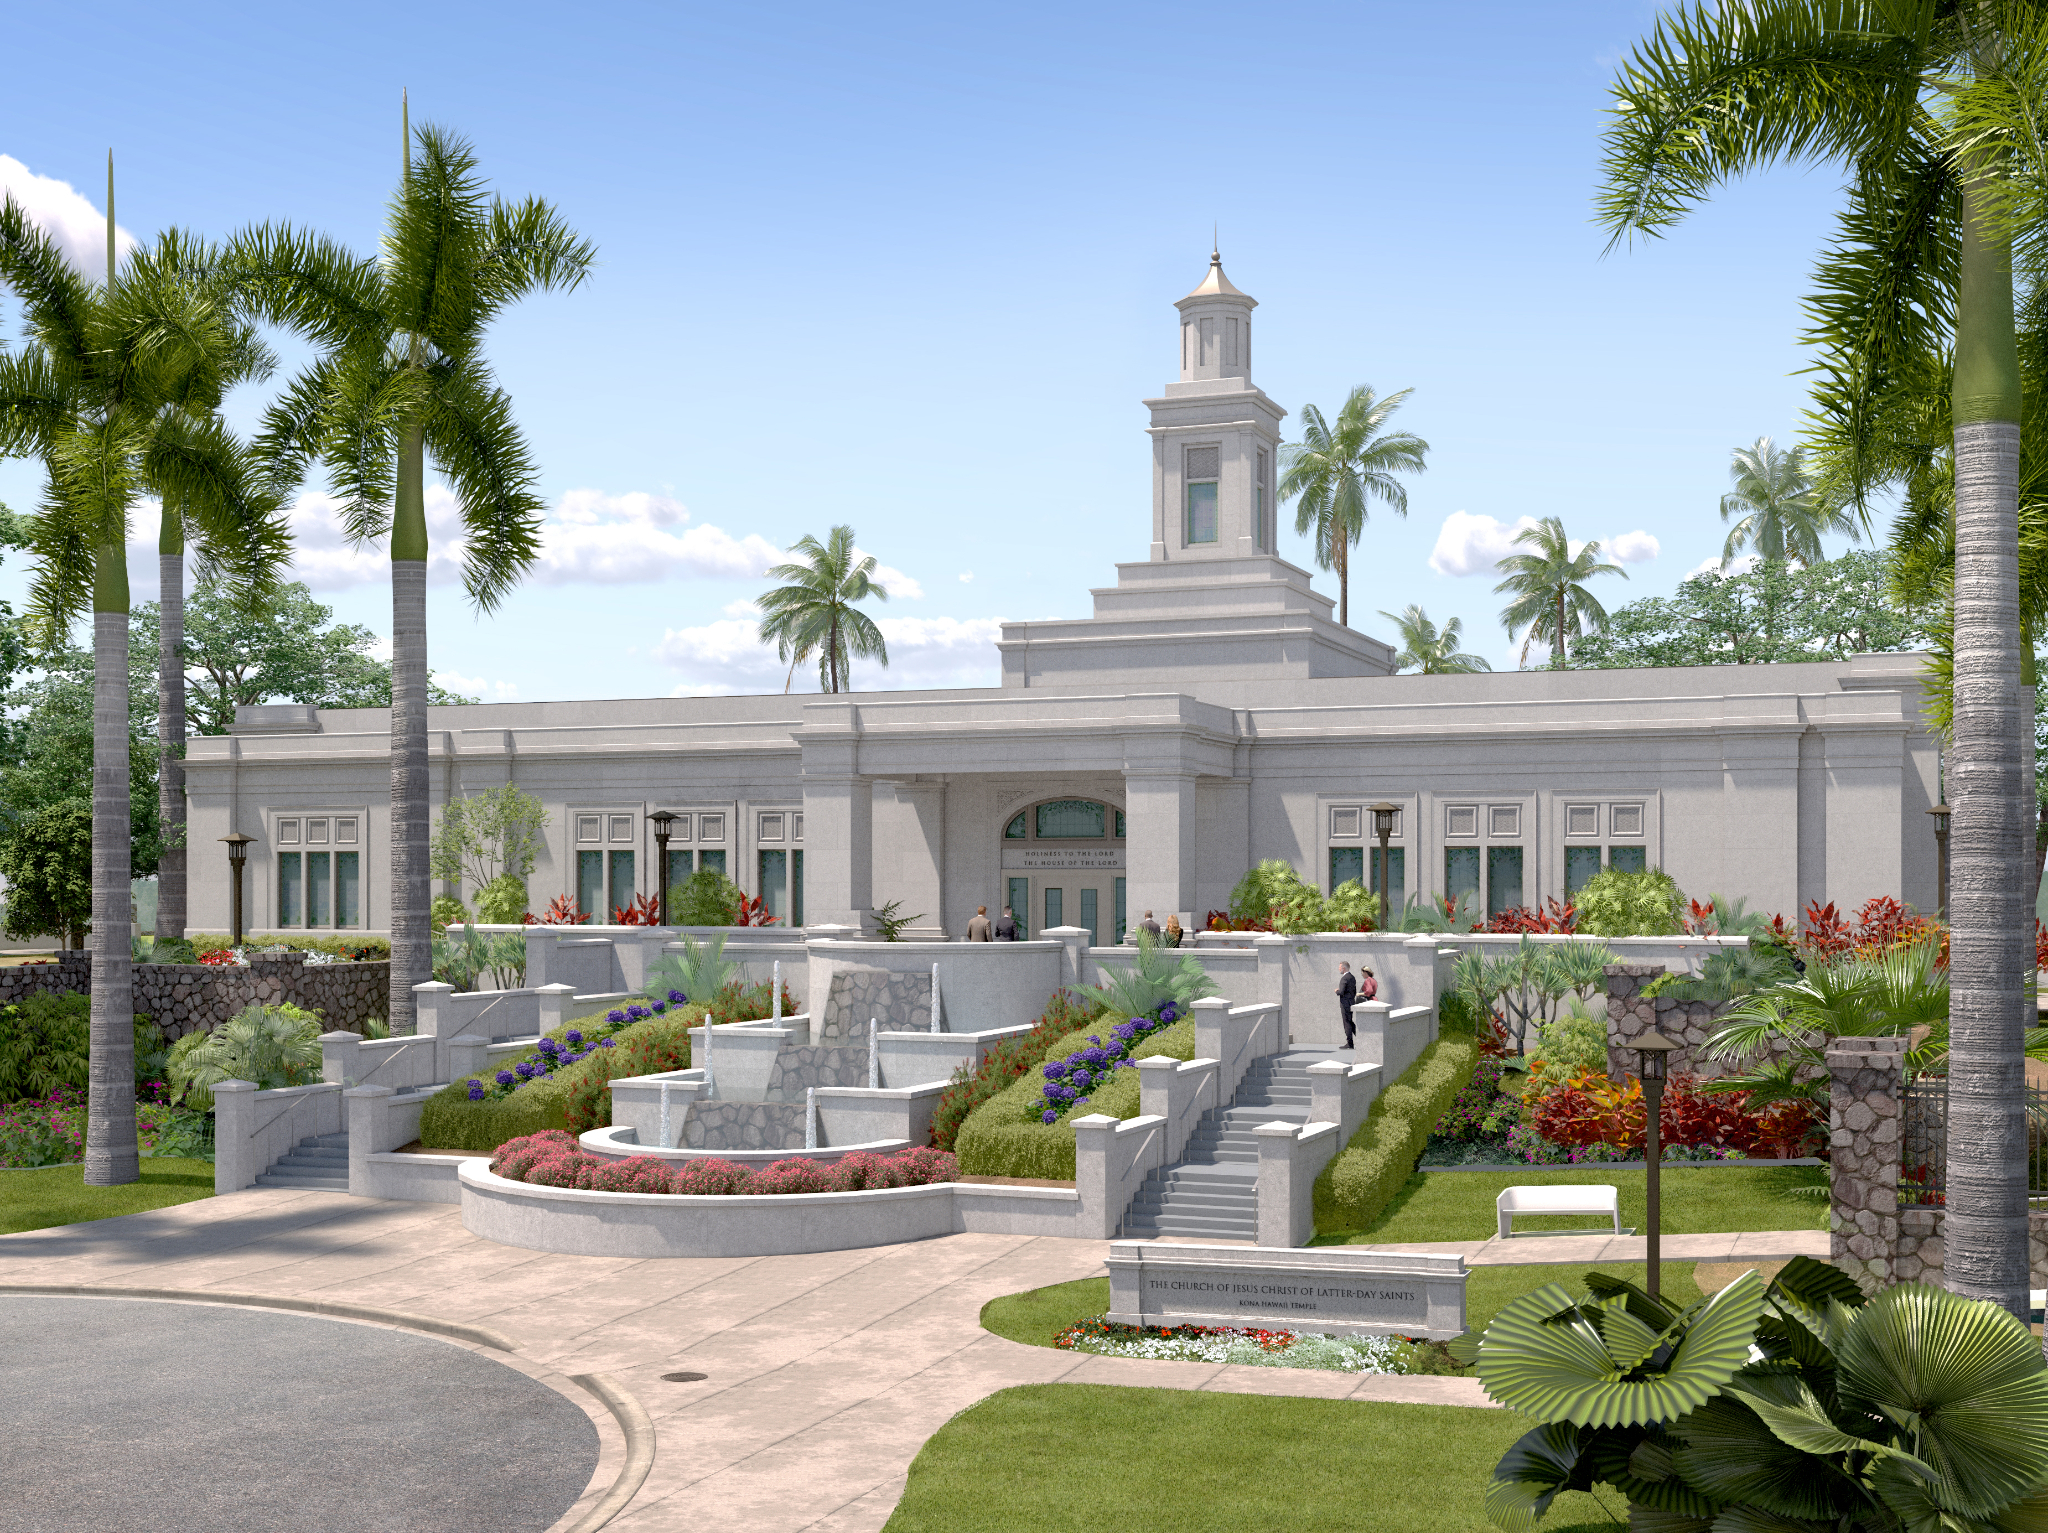 A rendering of the renovated Kona Hawaii Temple.